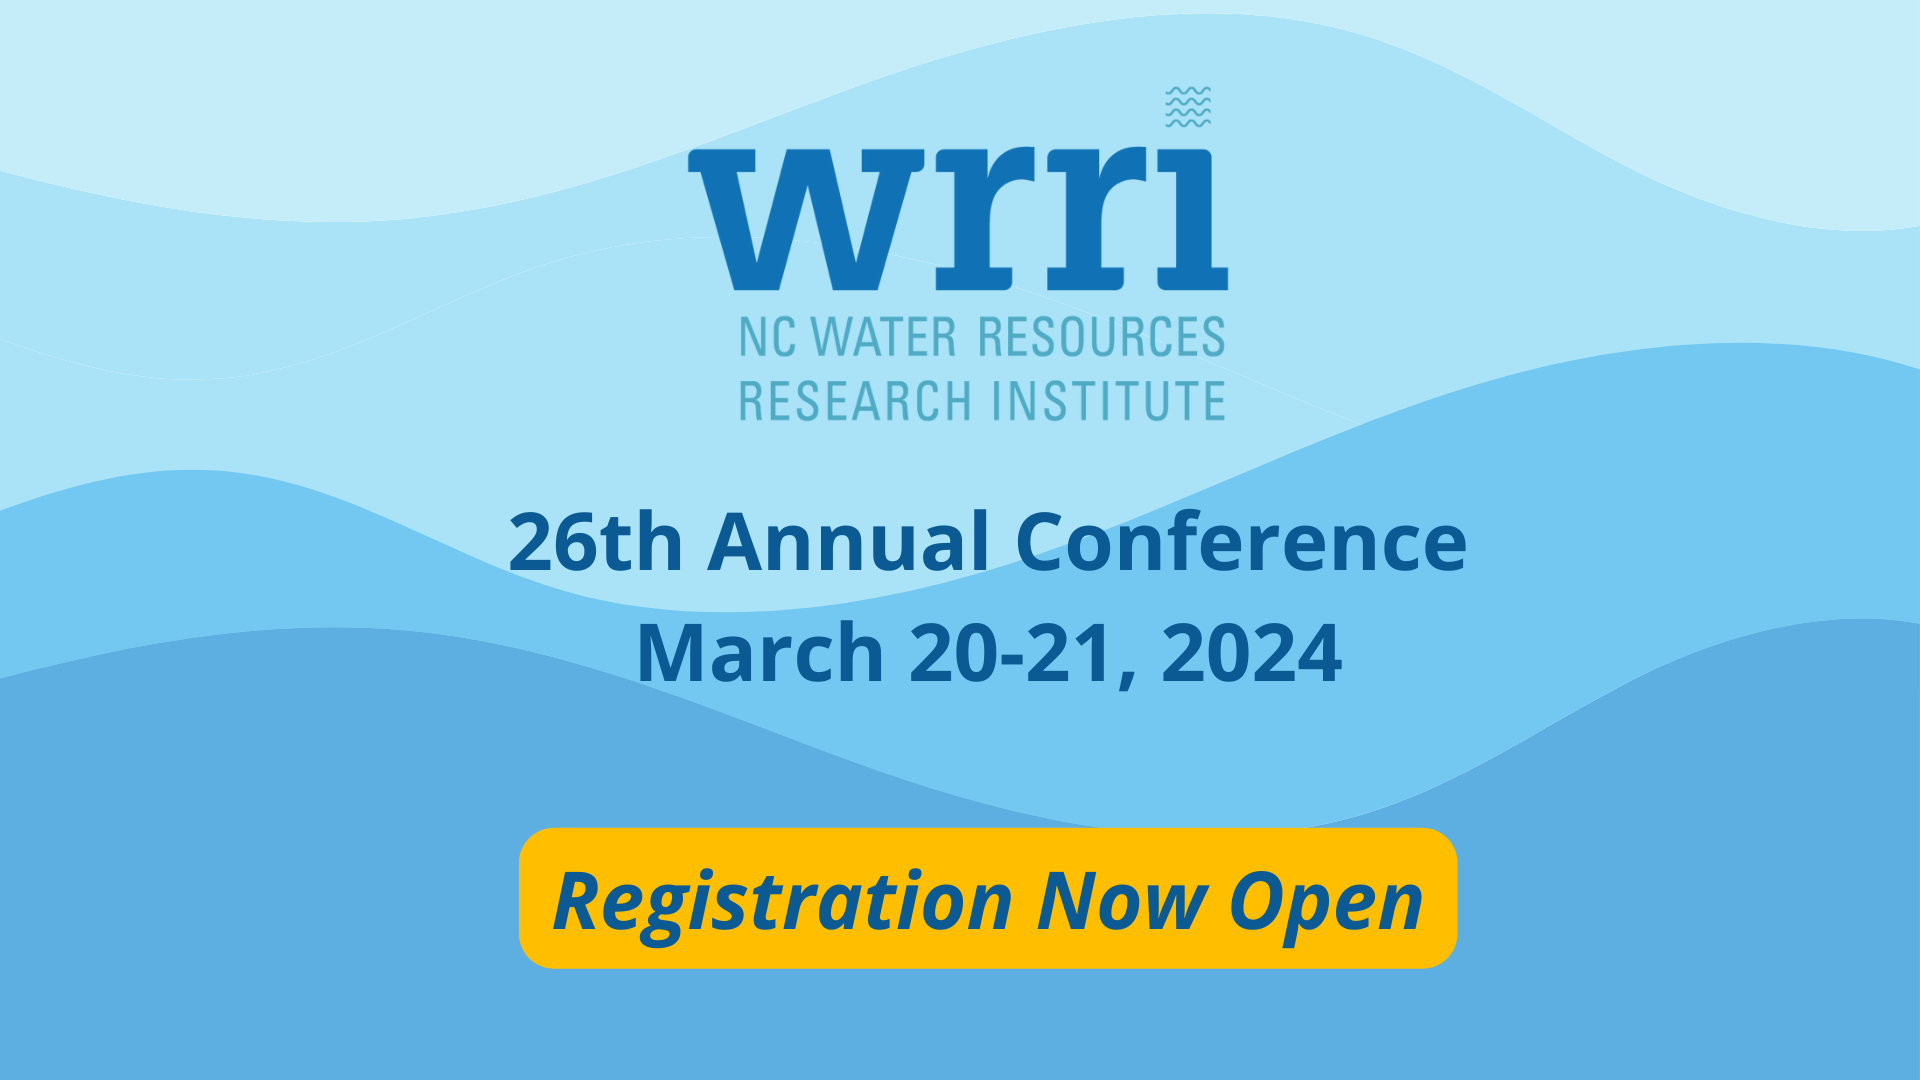 Blue wavy background. Foreground reads, "WRRI 26th Annual Conference, March 20-21, 2024: Registration Now Open"